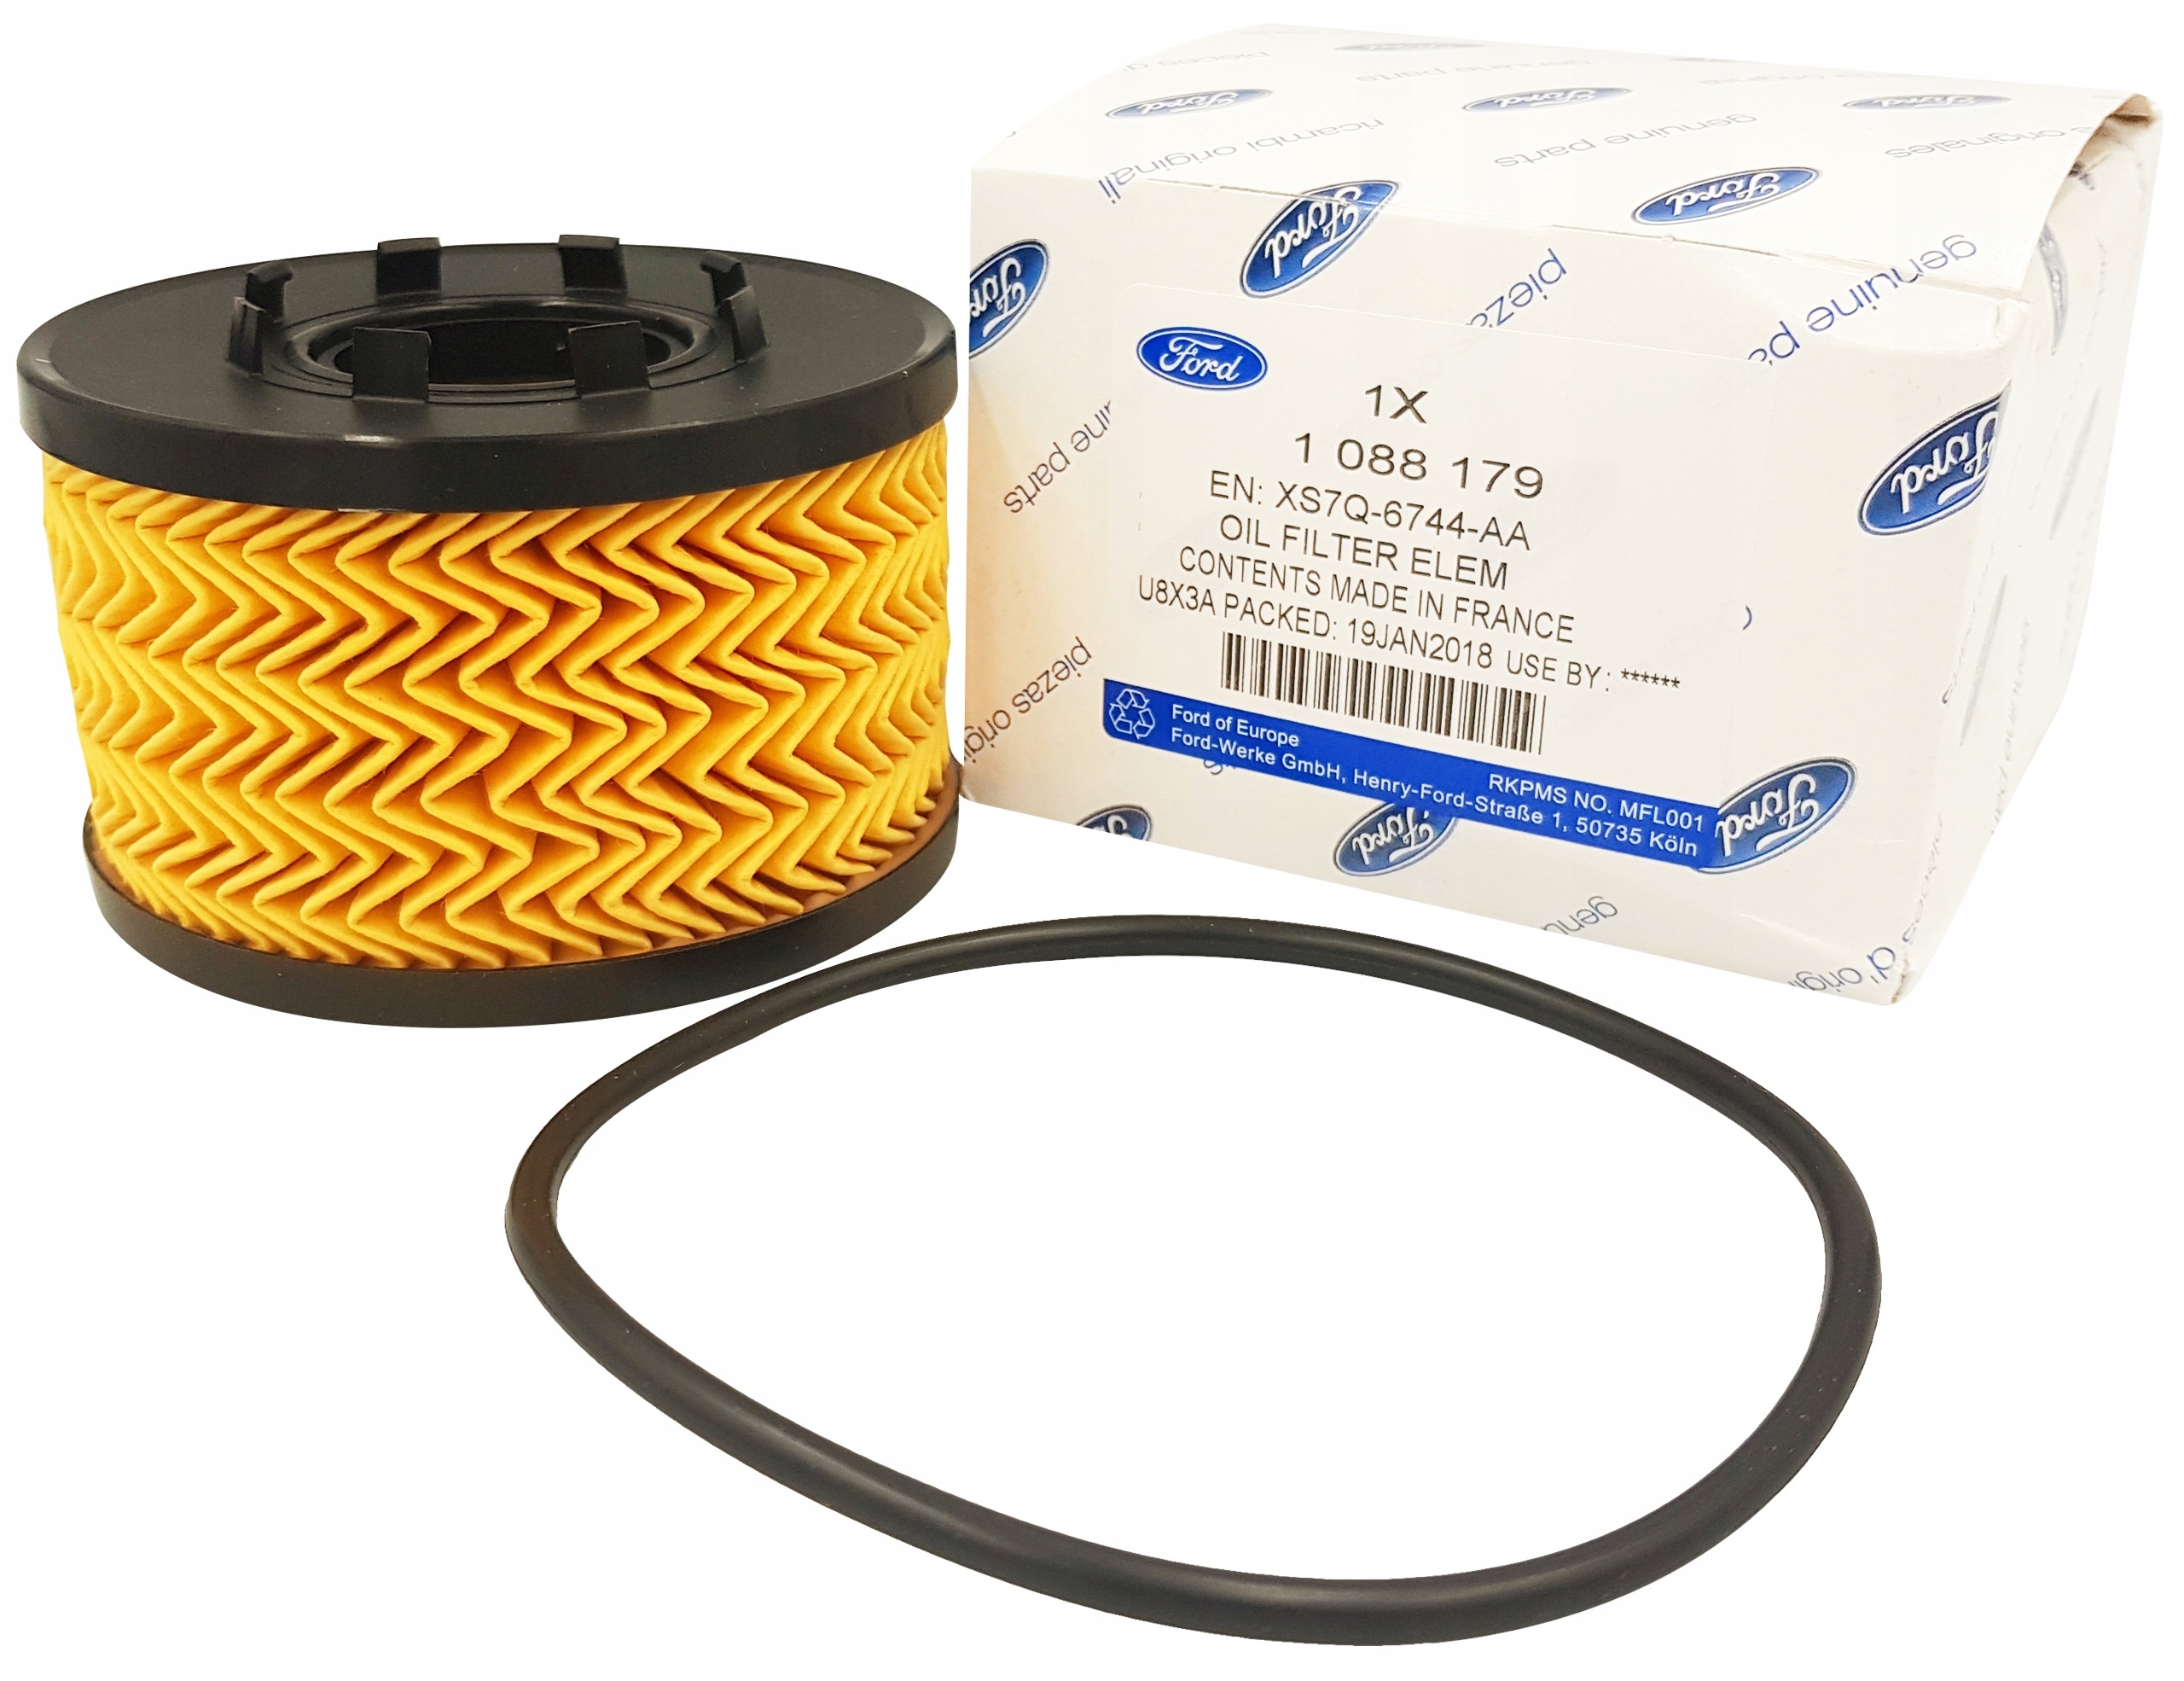 Ford 1 088 179 Oil Filter 1088179